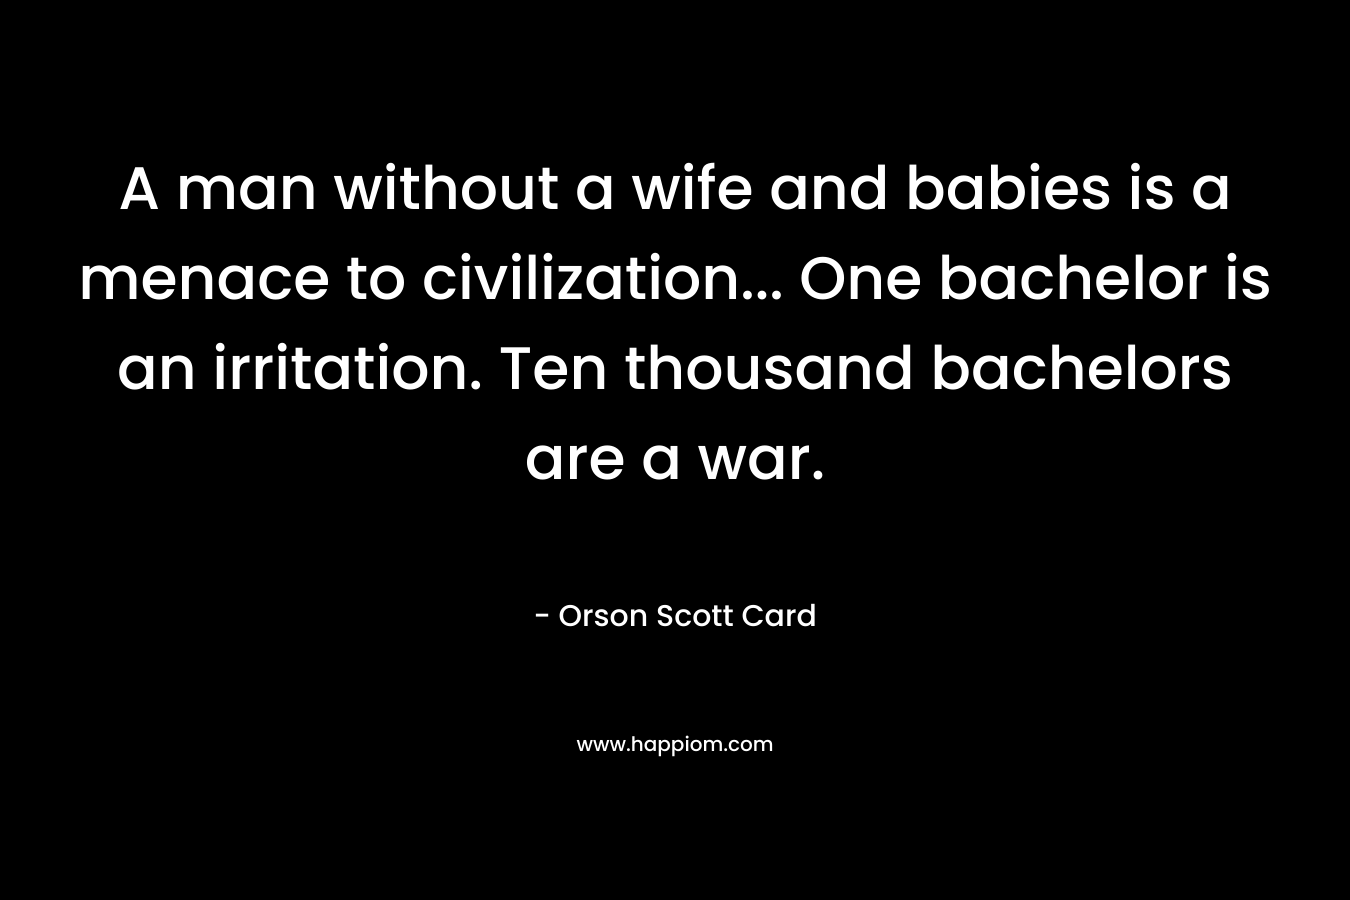 A man without a wife and babies is a menace to civilization… One bachelor is an irritation. Ten thousand bachelors are a war. – Orson Scott Card